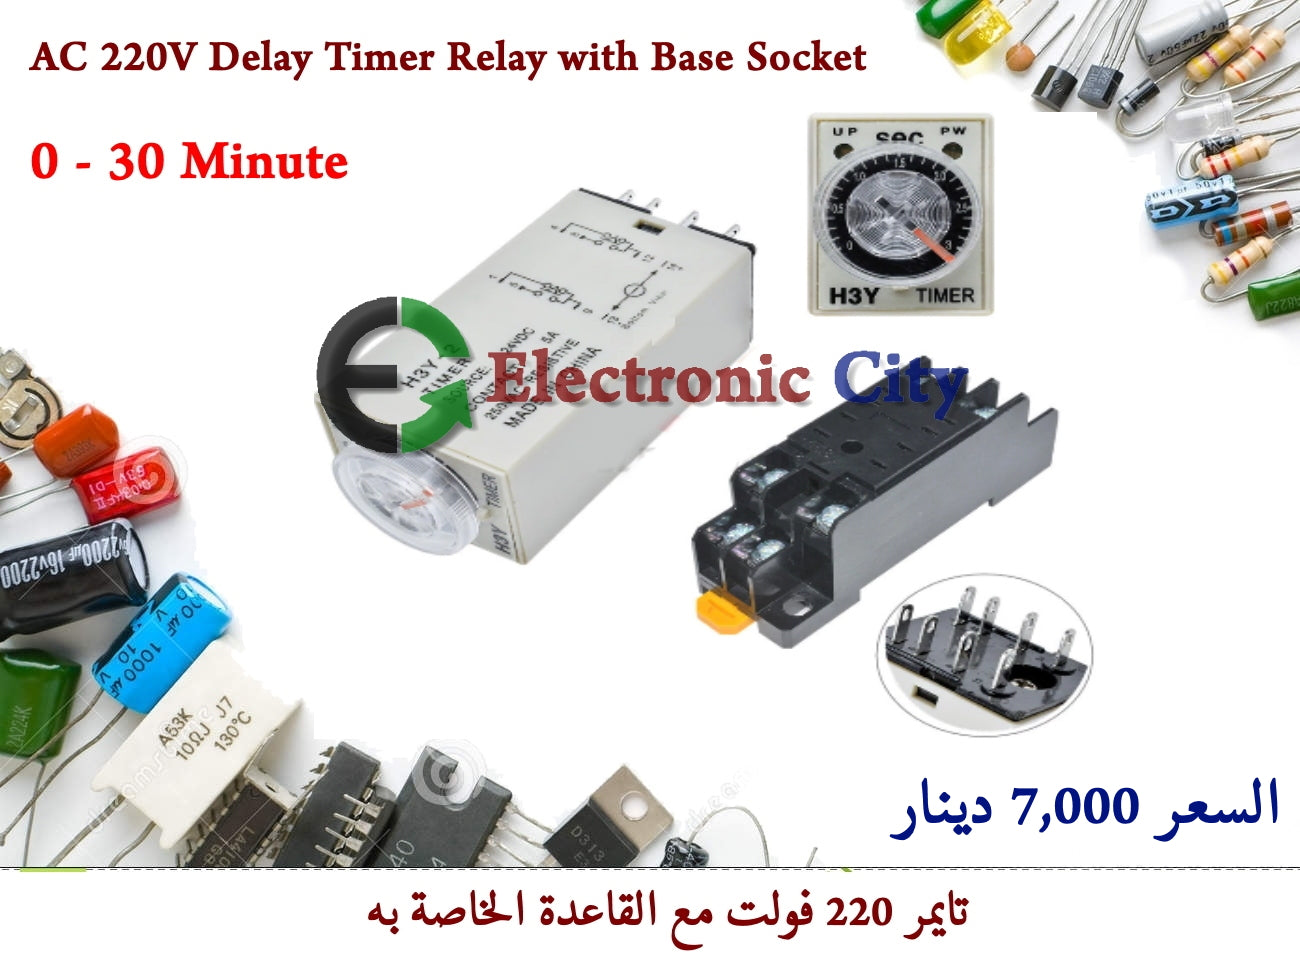 AC 220V Delay Timer Relay with Base Socket 0 - 30 Minute #M 050589 + 011725